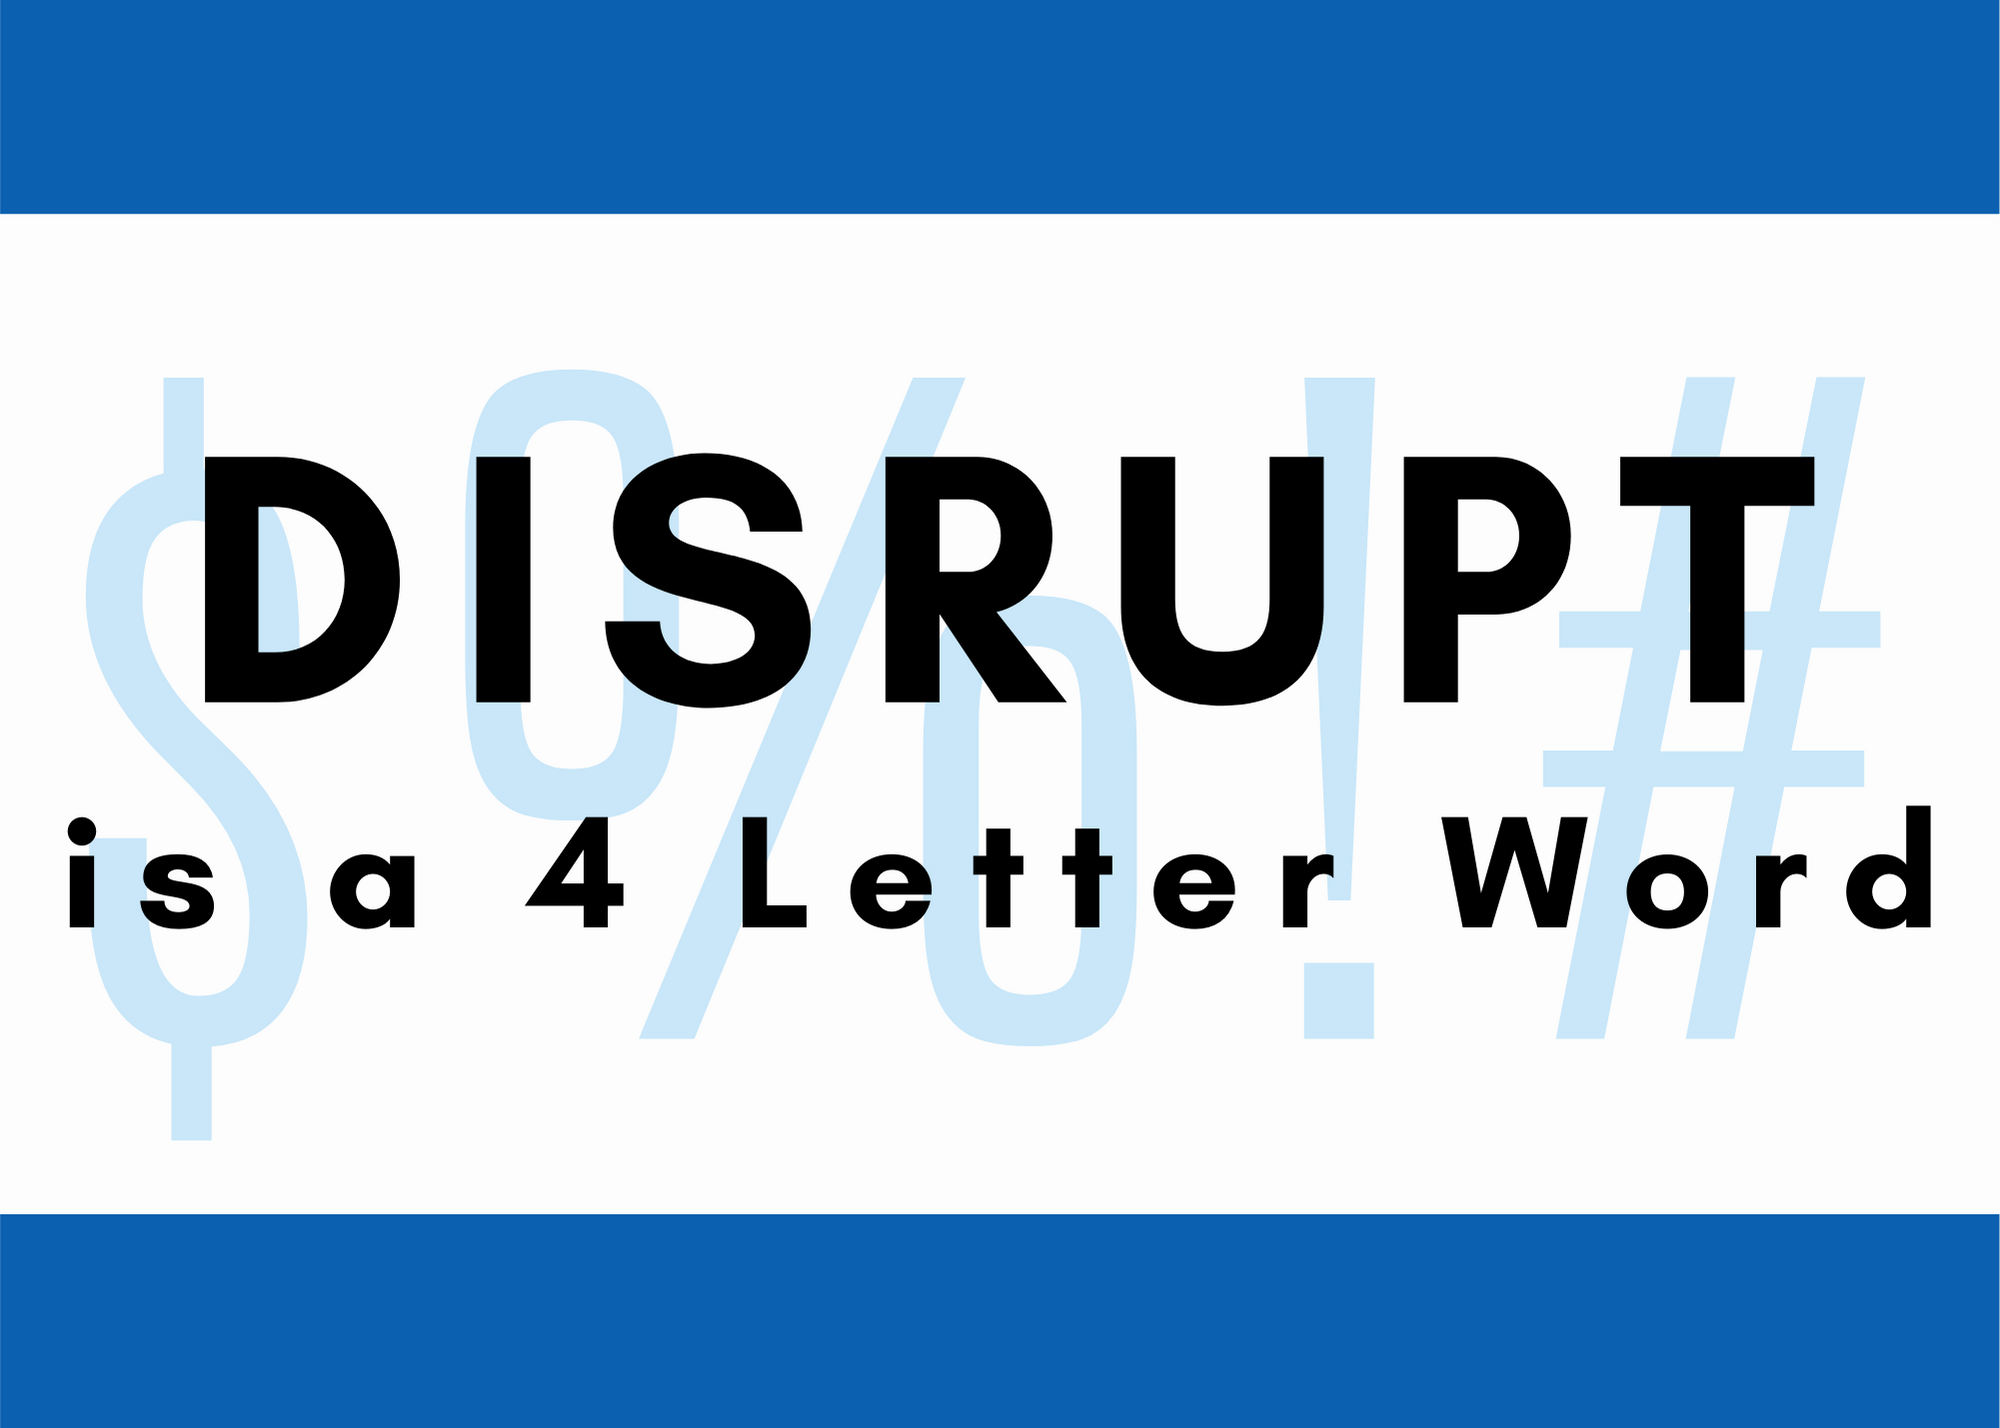 disrupt is a four letter word in fintech, innovation should enhance instead